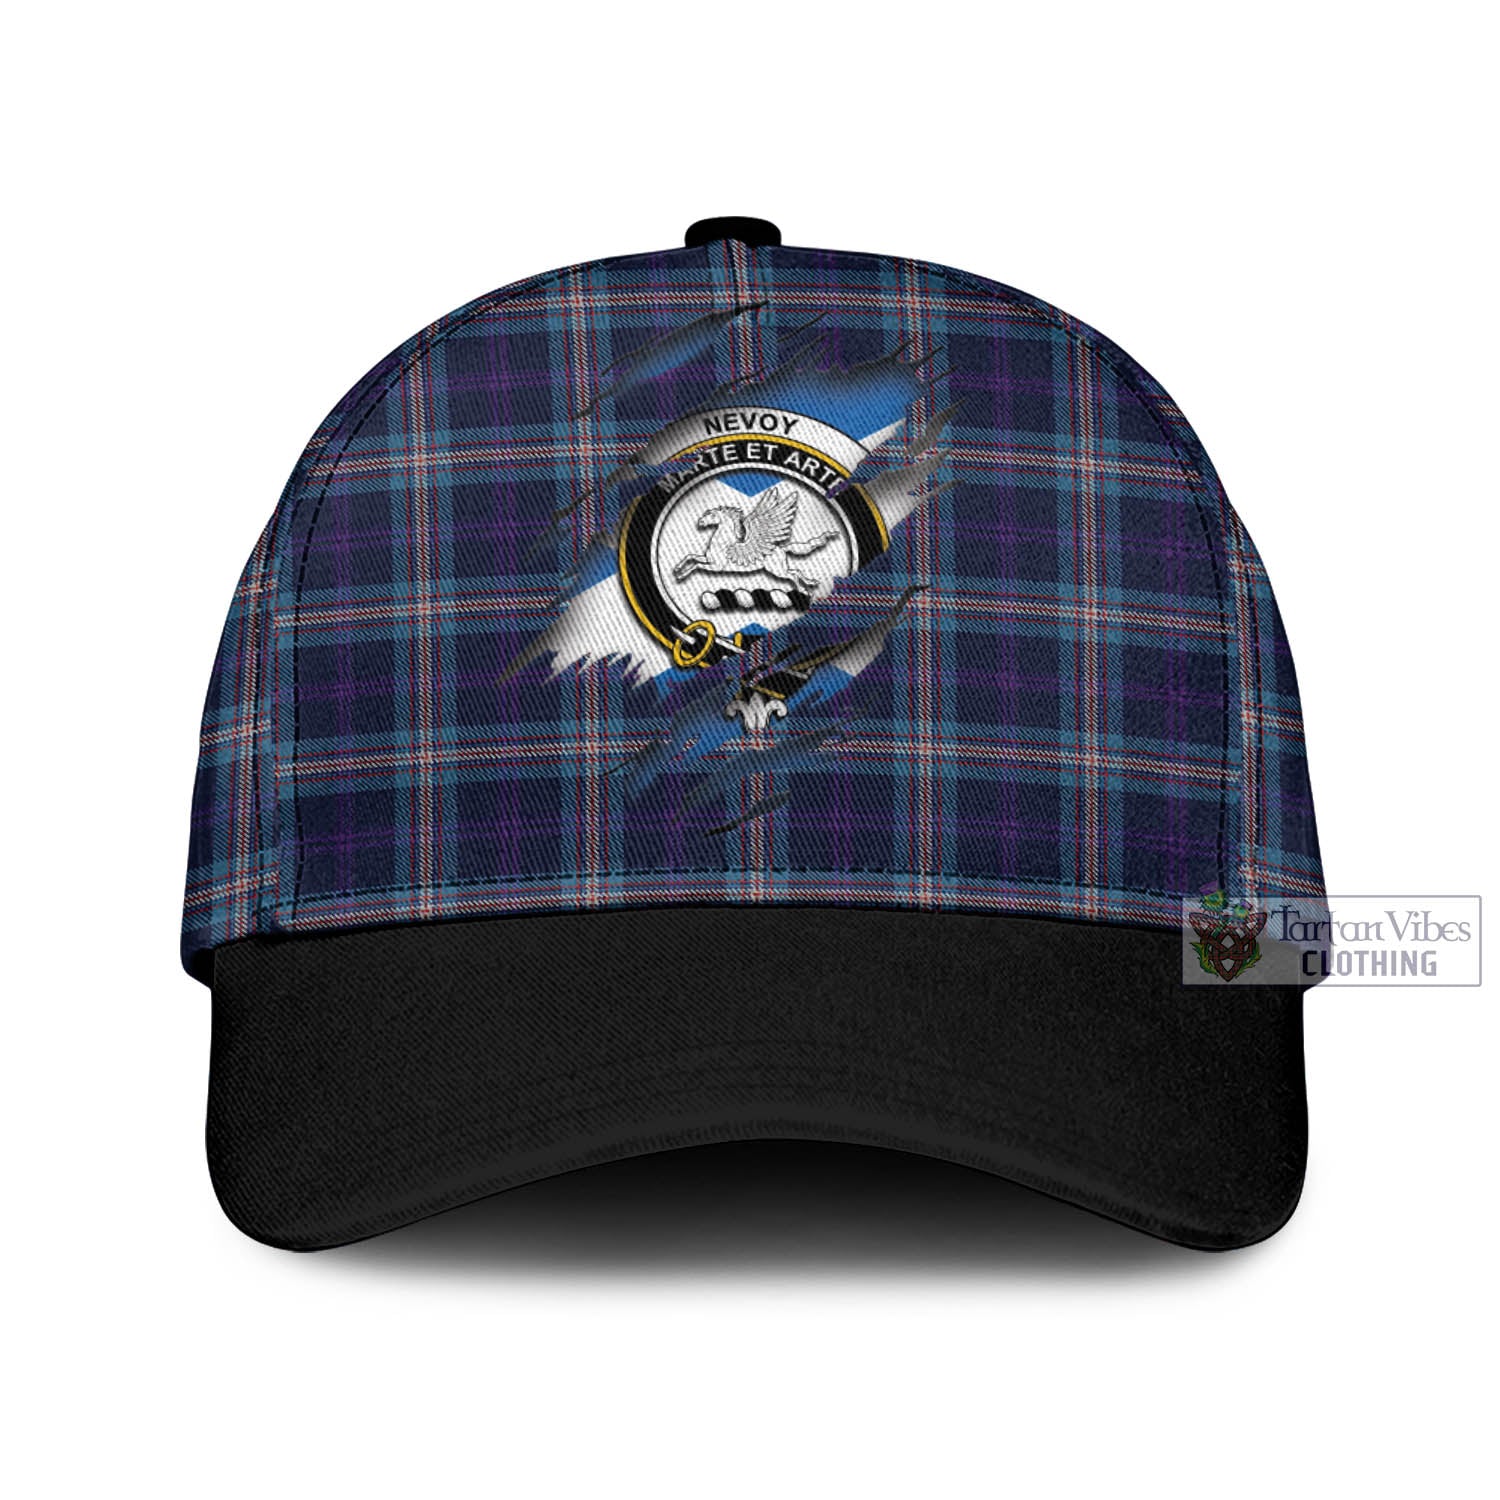 Tartan Vibes Clothing Nevoy Tartan Classic Cap with Family Crest In Me Style